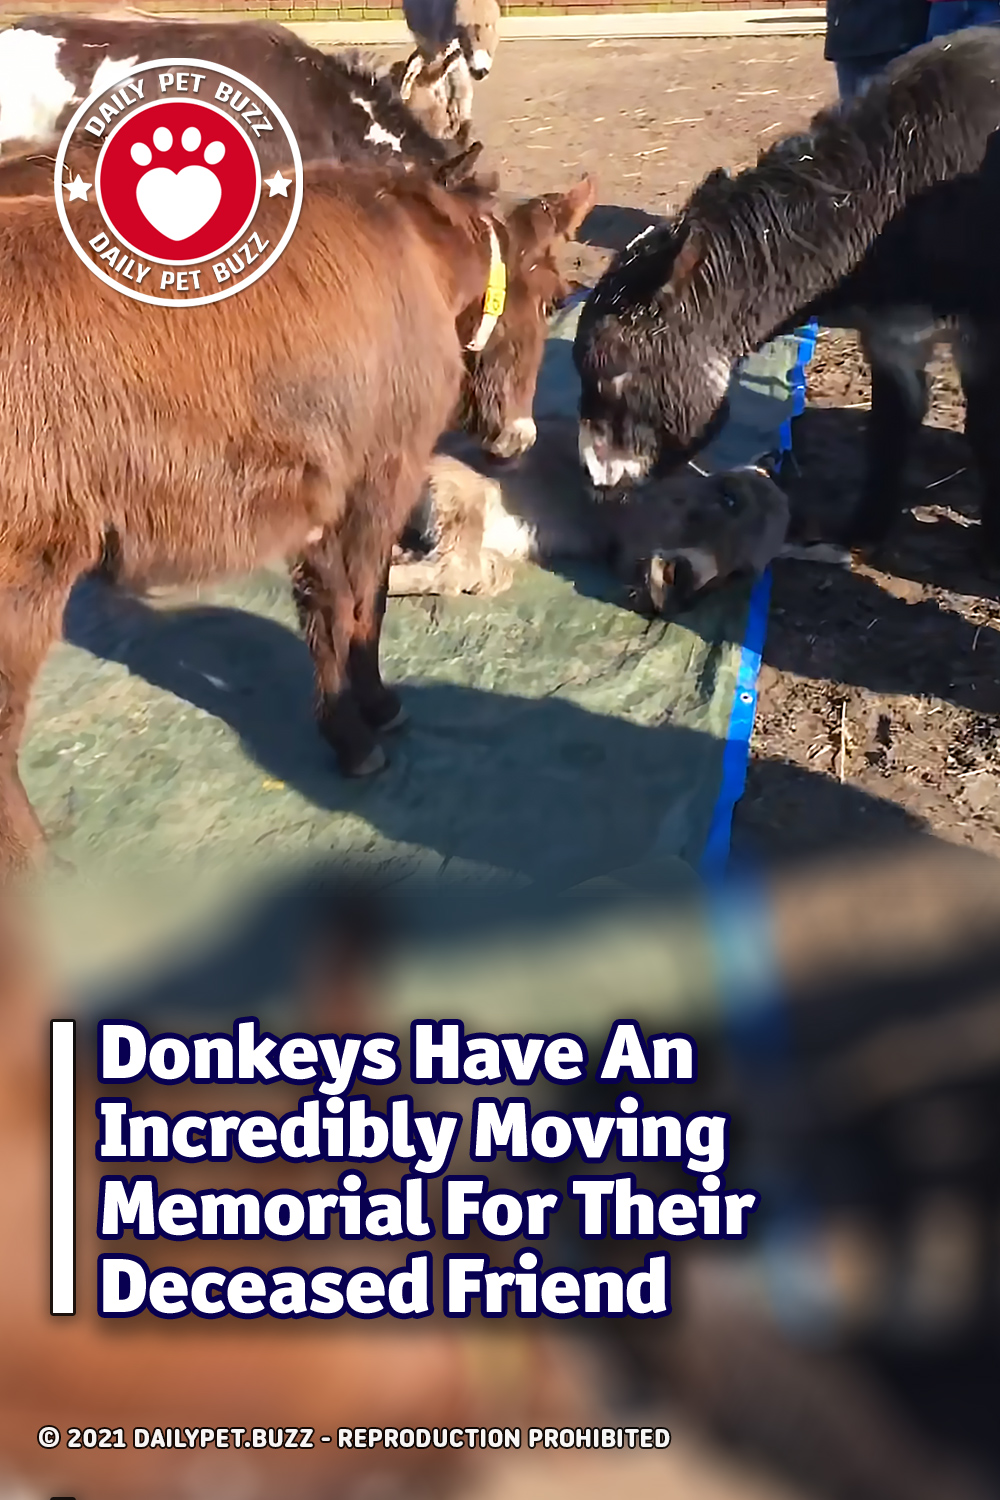 Donkeys Have An Incredibly Moving Memorial For Their Deceased Friend